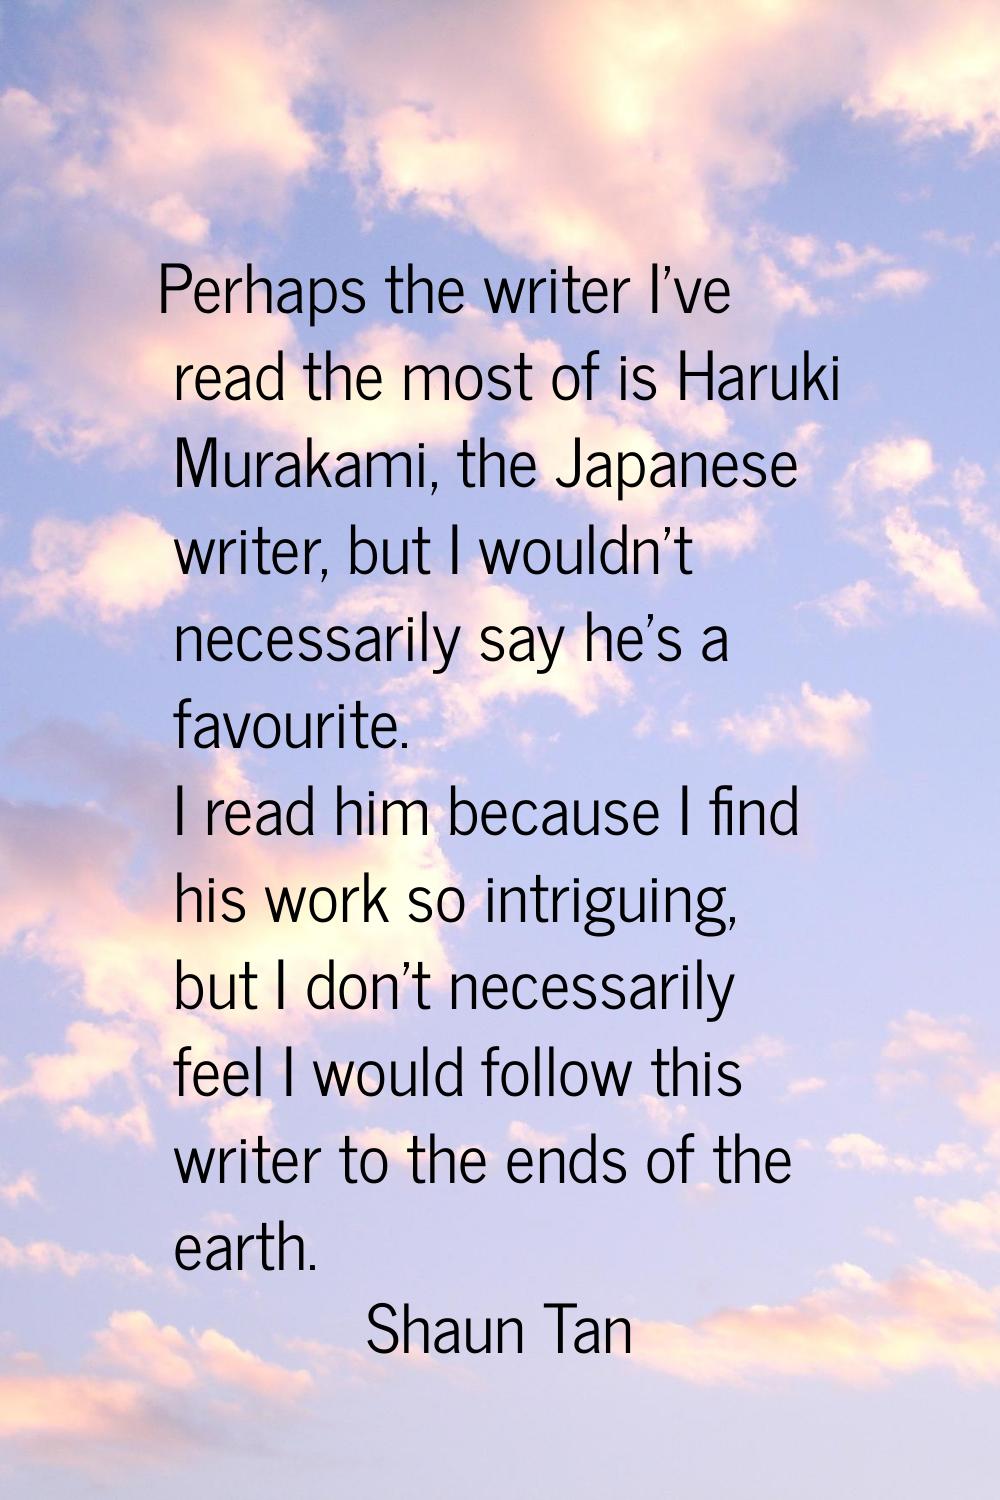 Perhaps the writer I've read the most of is Haruki Murakami, the Japanese writer, but I wouldn't ne